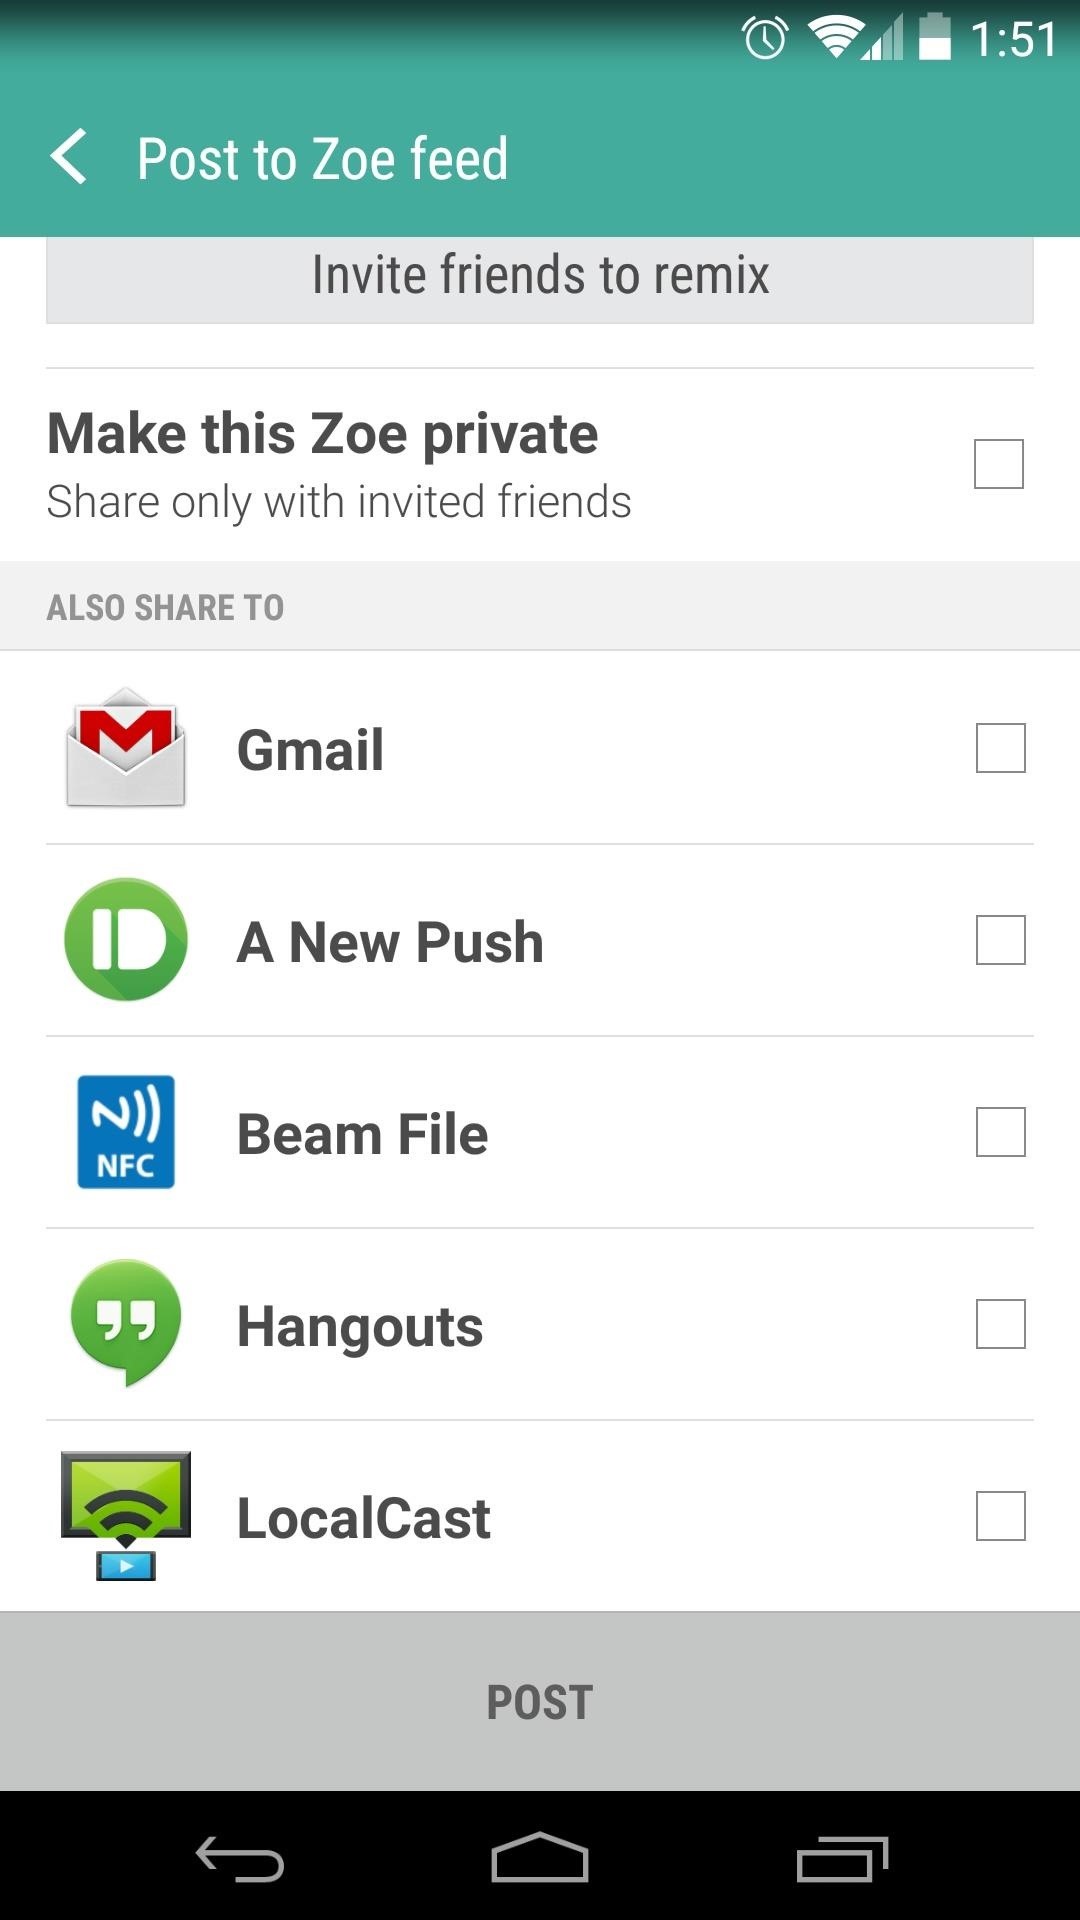 How to Use HTC's Zoe to Create & Share Pro-Quality Videos on Any Android KitKat Phone